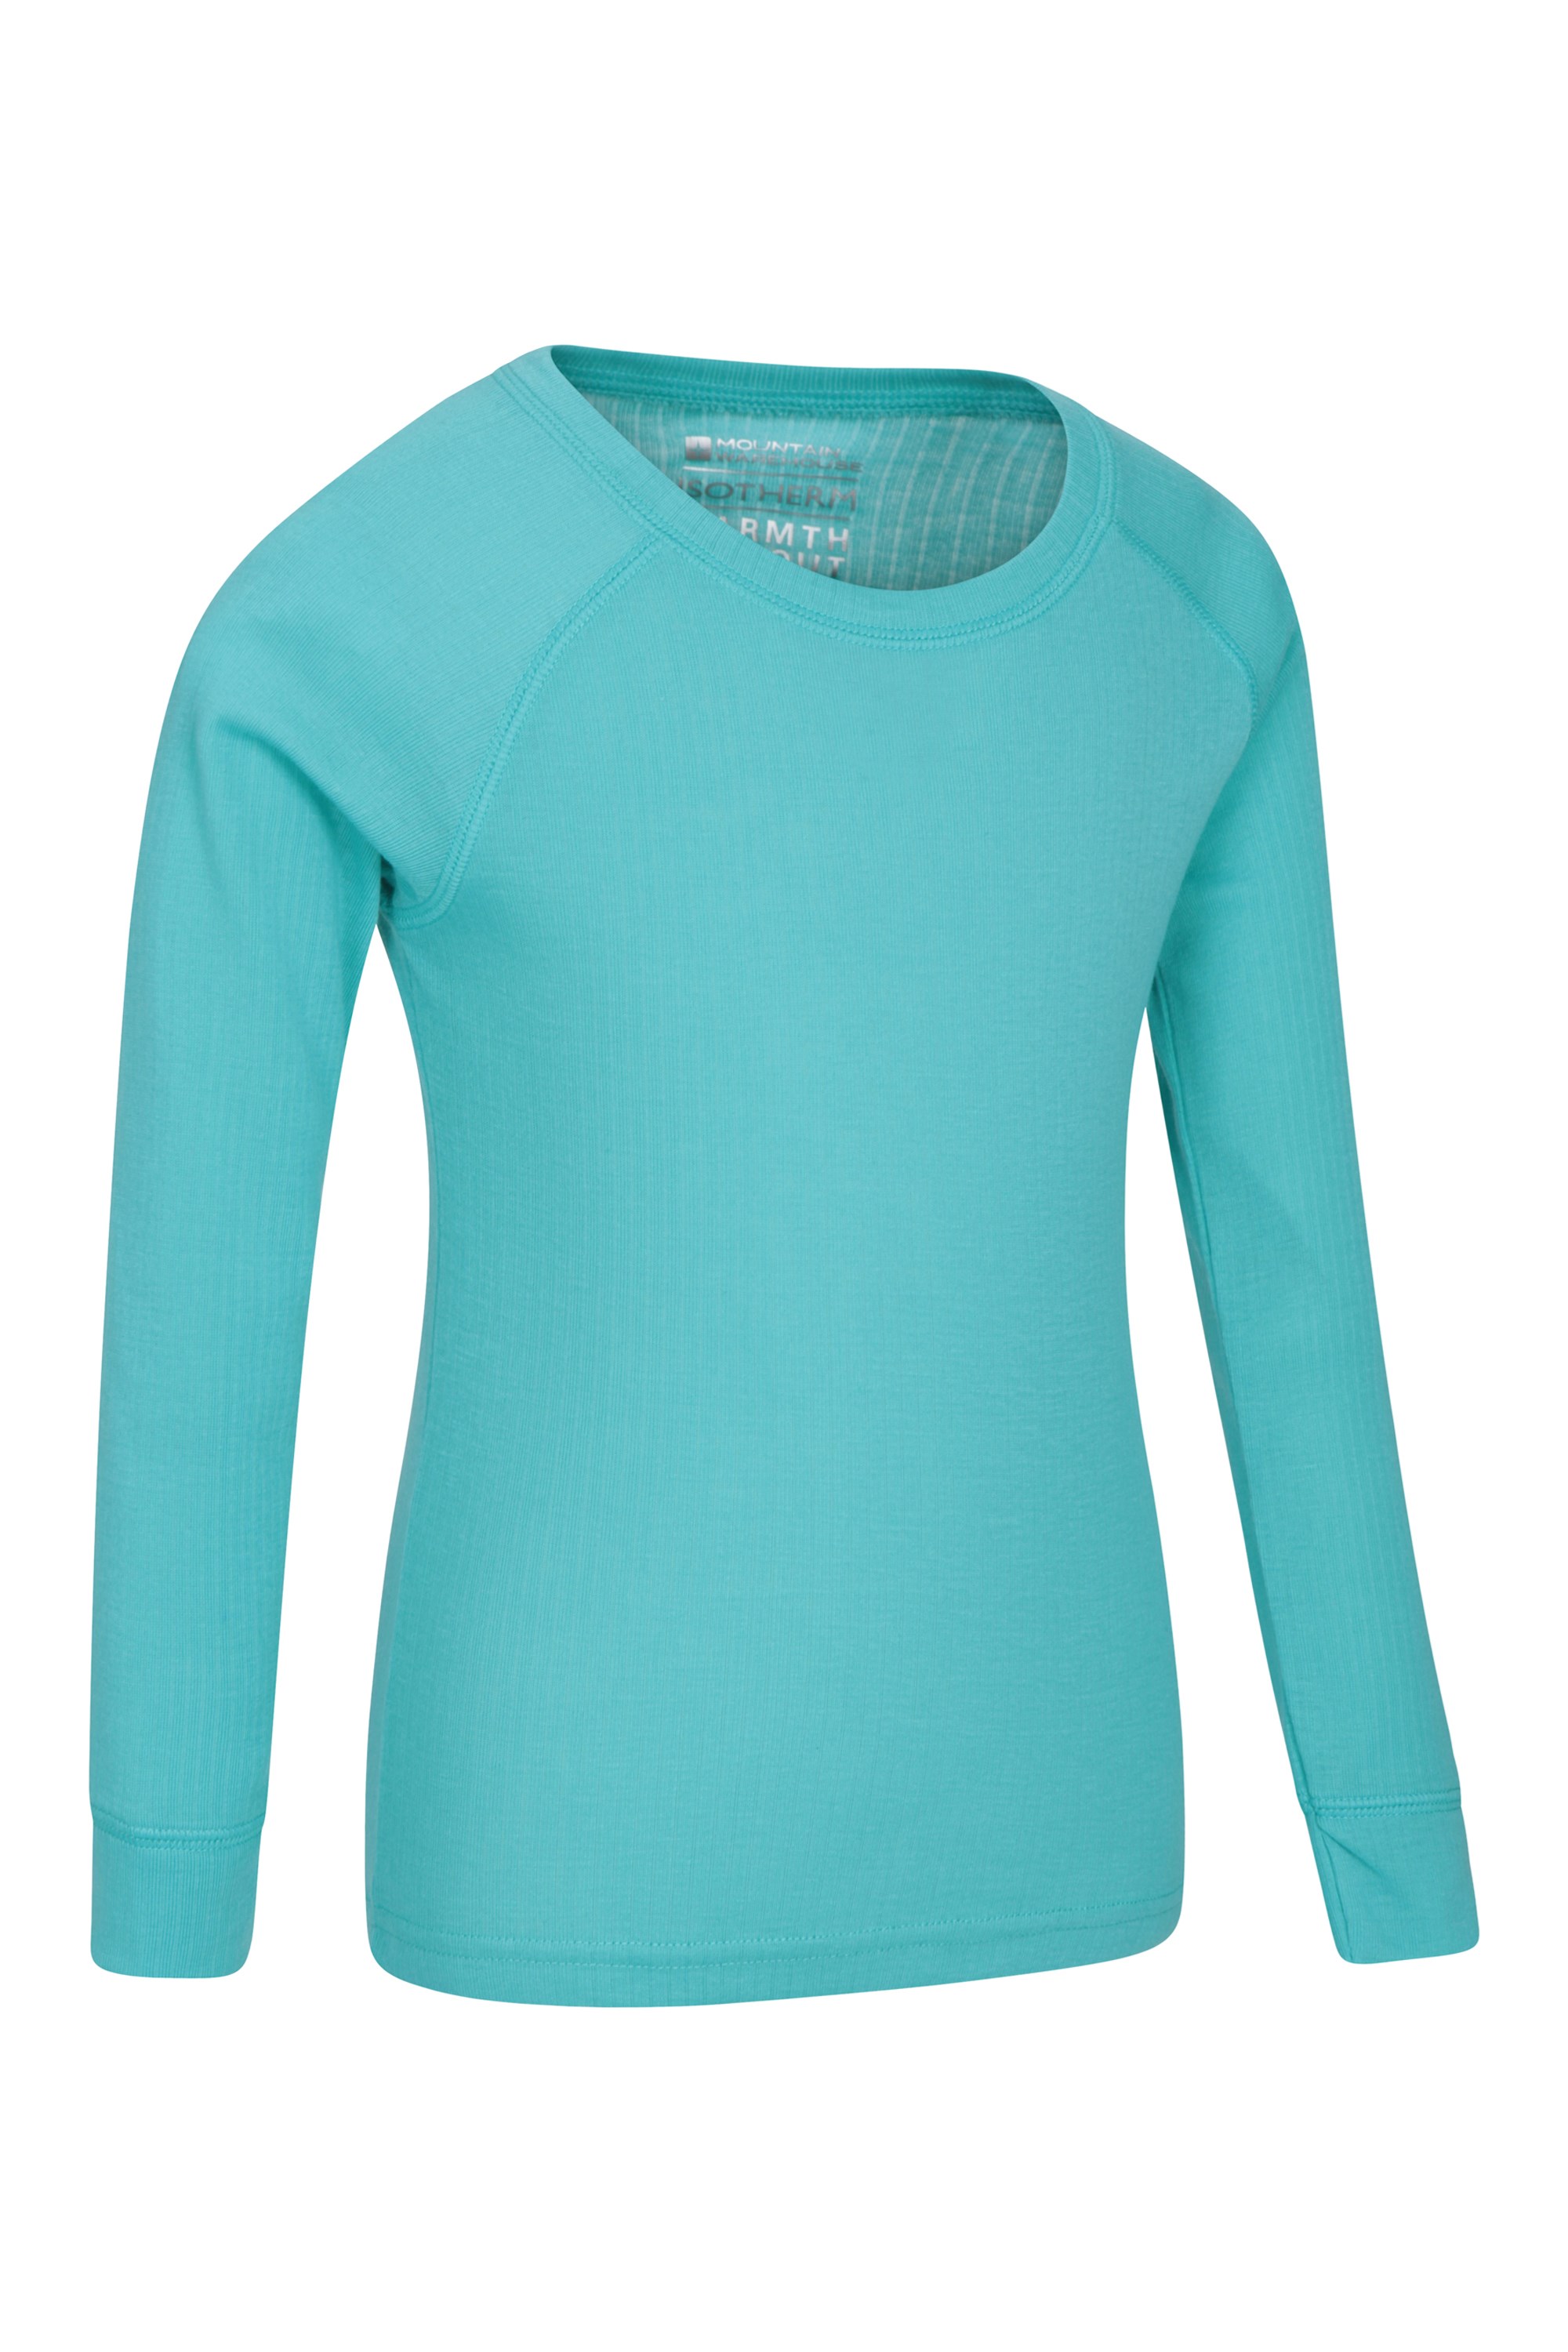 Mountain Warehouse Merino Kids Round Neck Thermal Baselayer Top Light Quick Dry Childrens T-Shirt Full Sleeves Great for Winter Camping Warm Sweater Breathable